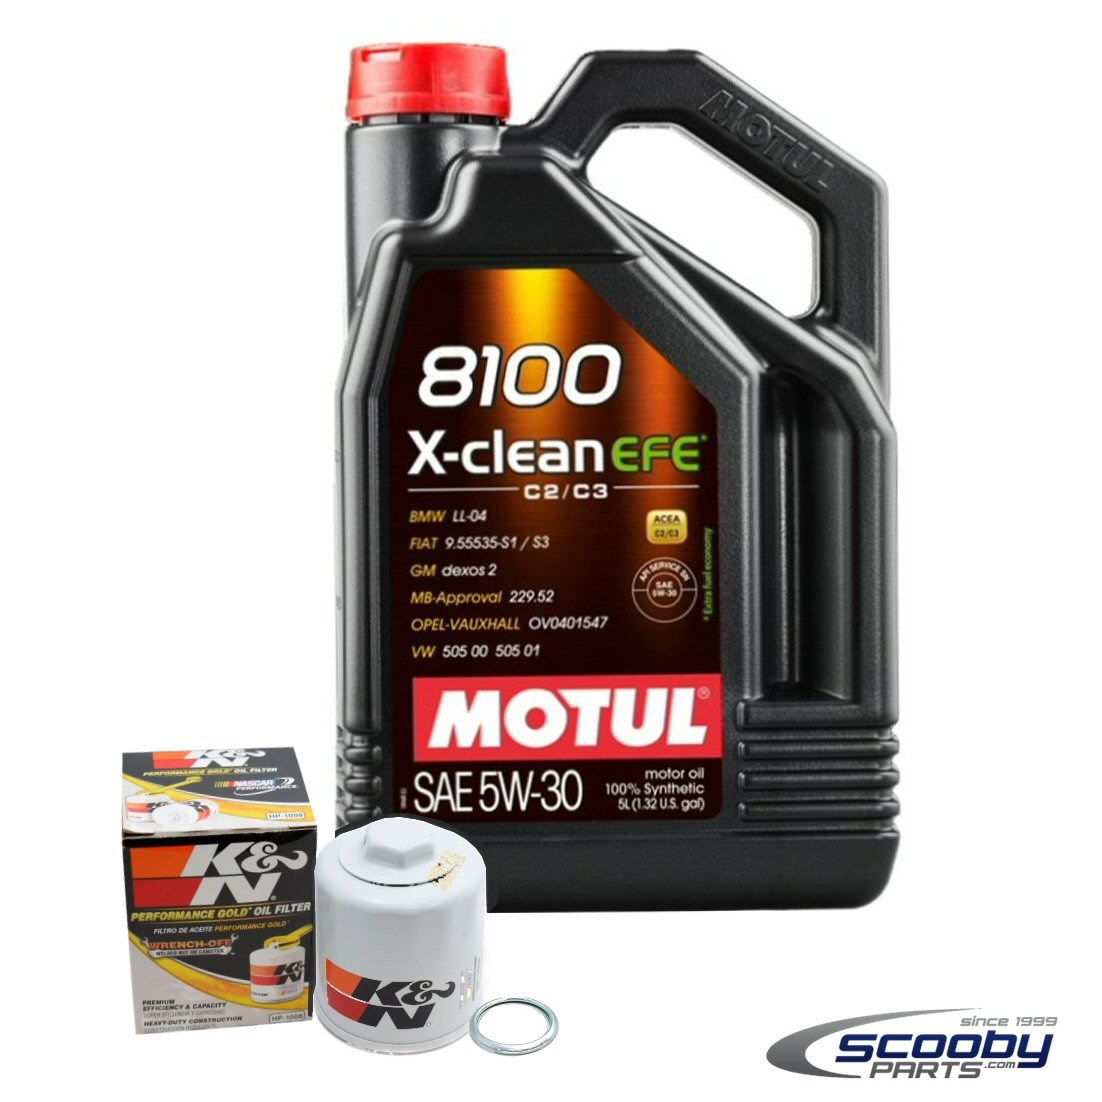 Motul 8100 X-clean efe Fully Synthetic 5w30 Engine Oil & K&N Gold Oil Filter Deal_1